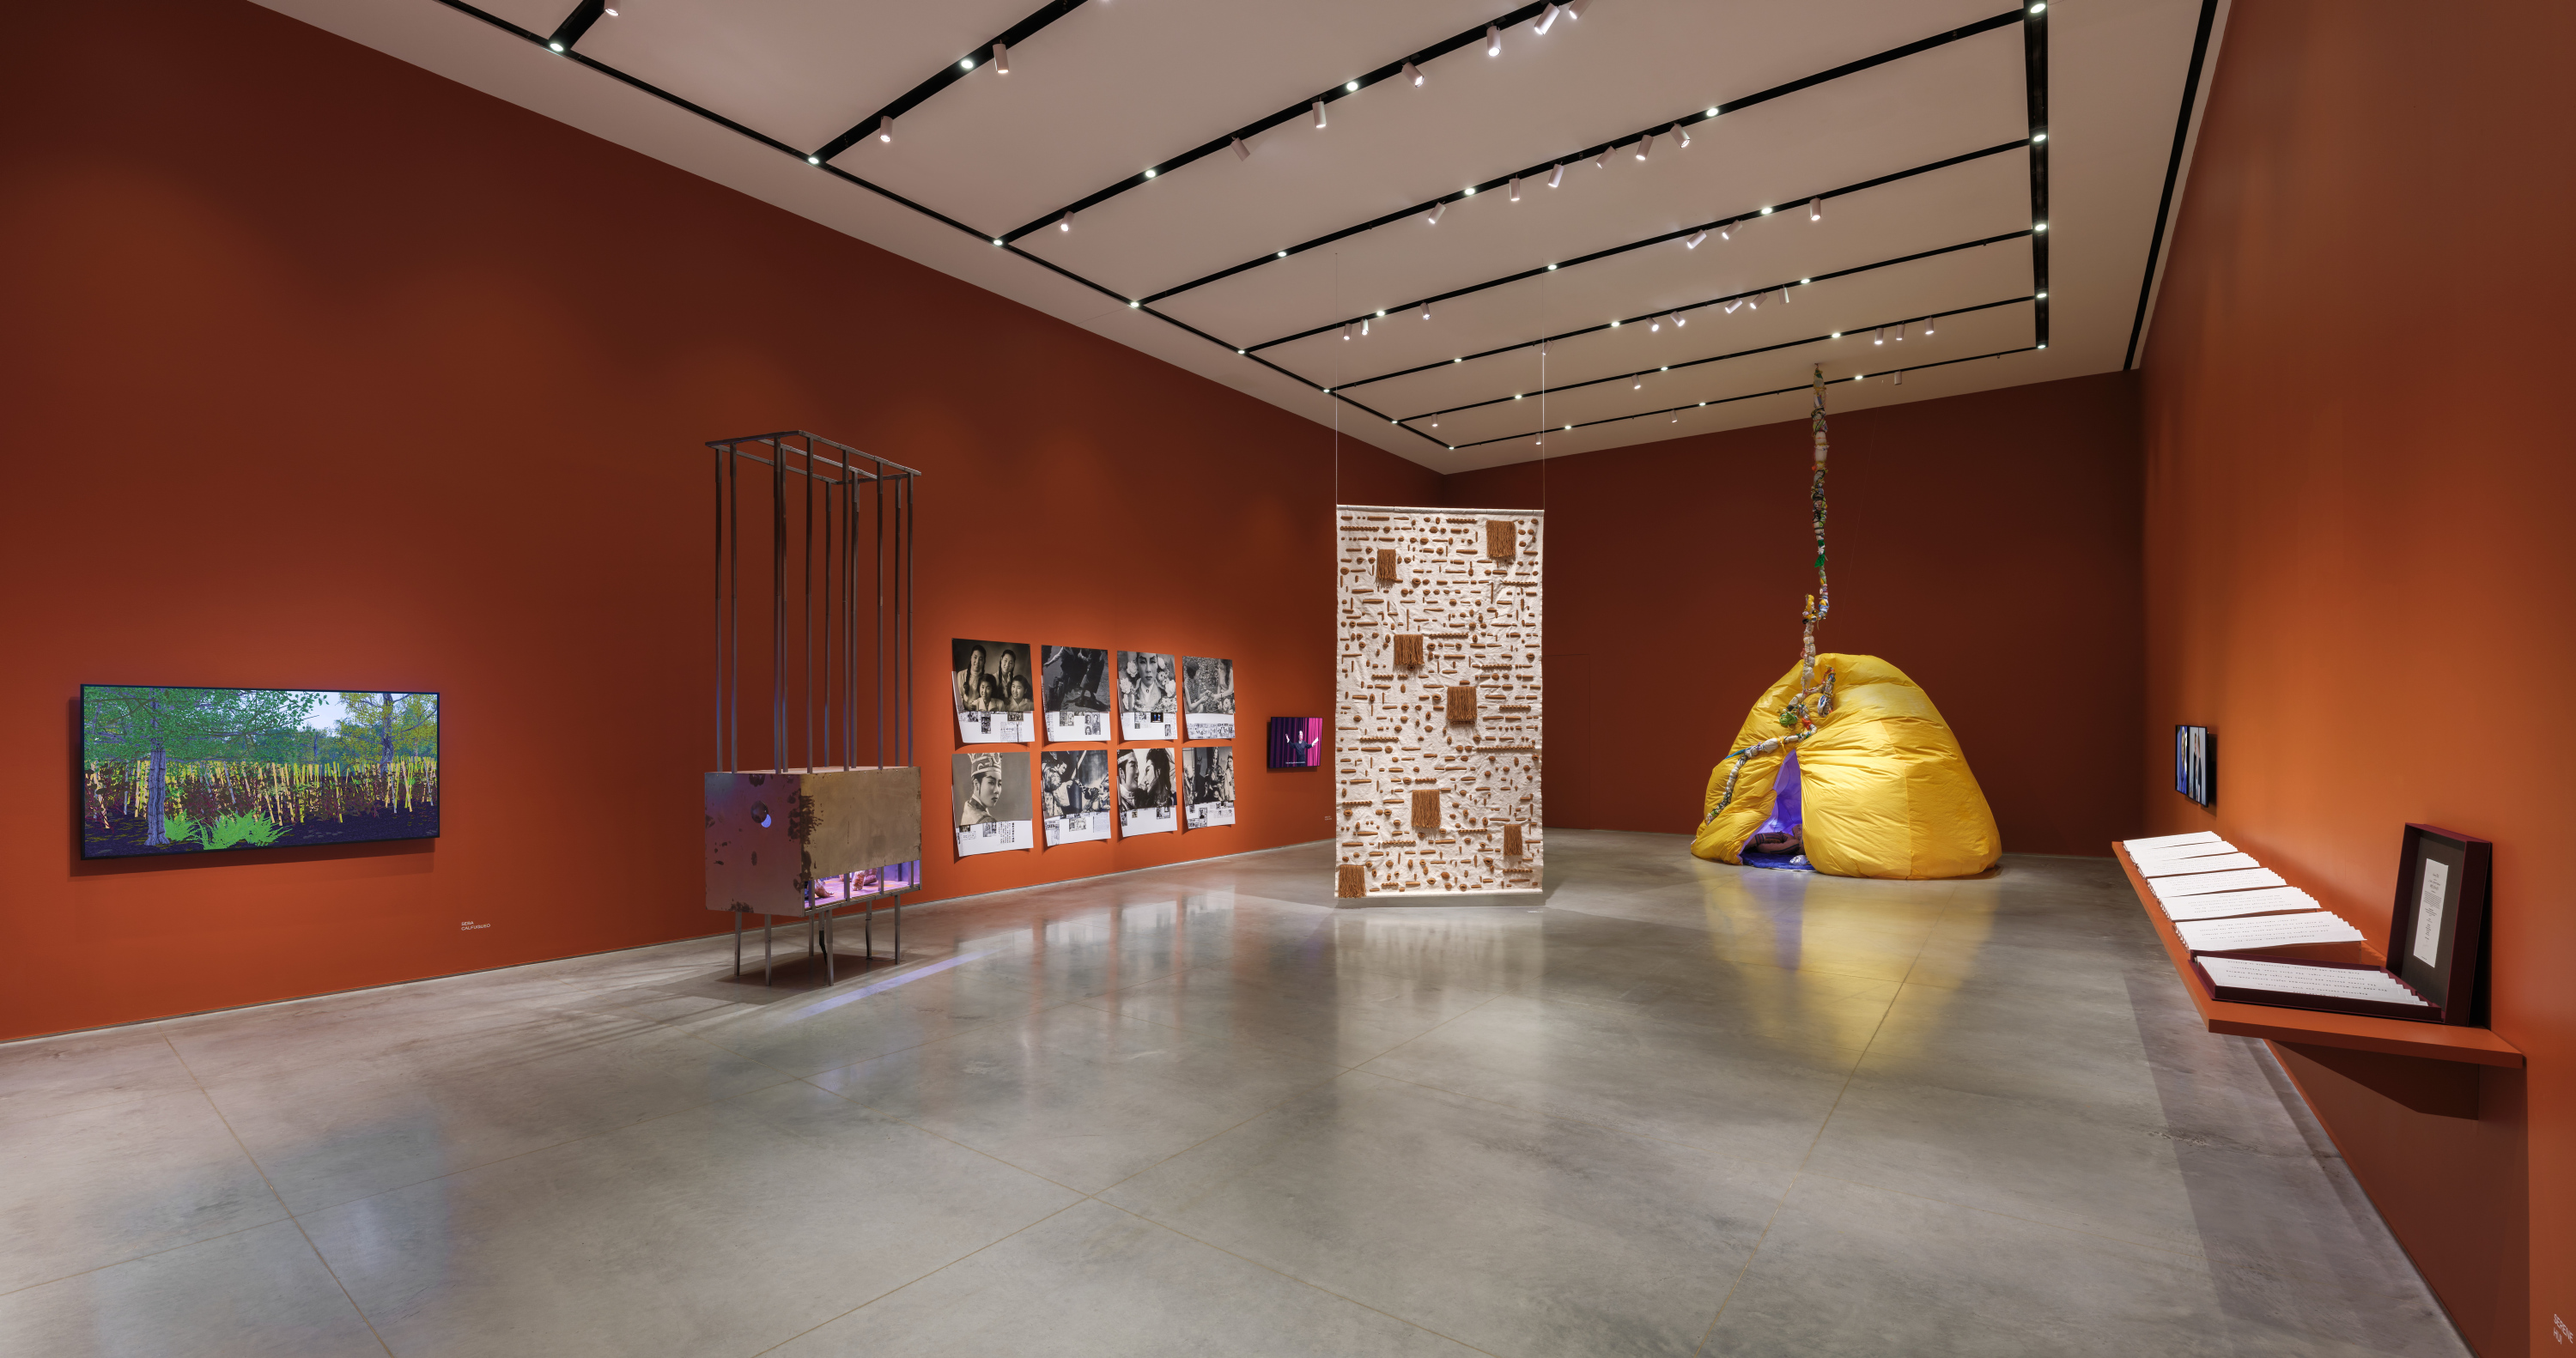 Gallery interior with terracotta-red walls and a gray floor. There are artworks installed on the wall, tv monitors, a suspended tapestry, a free-standing cage sculpture, and an inflatable yellow hut.